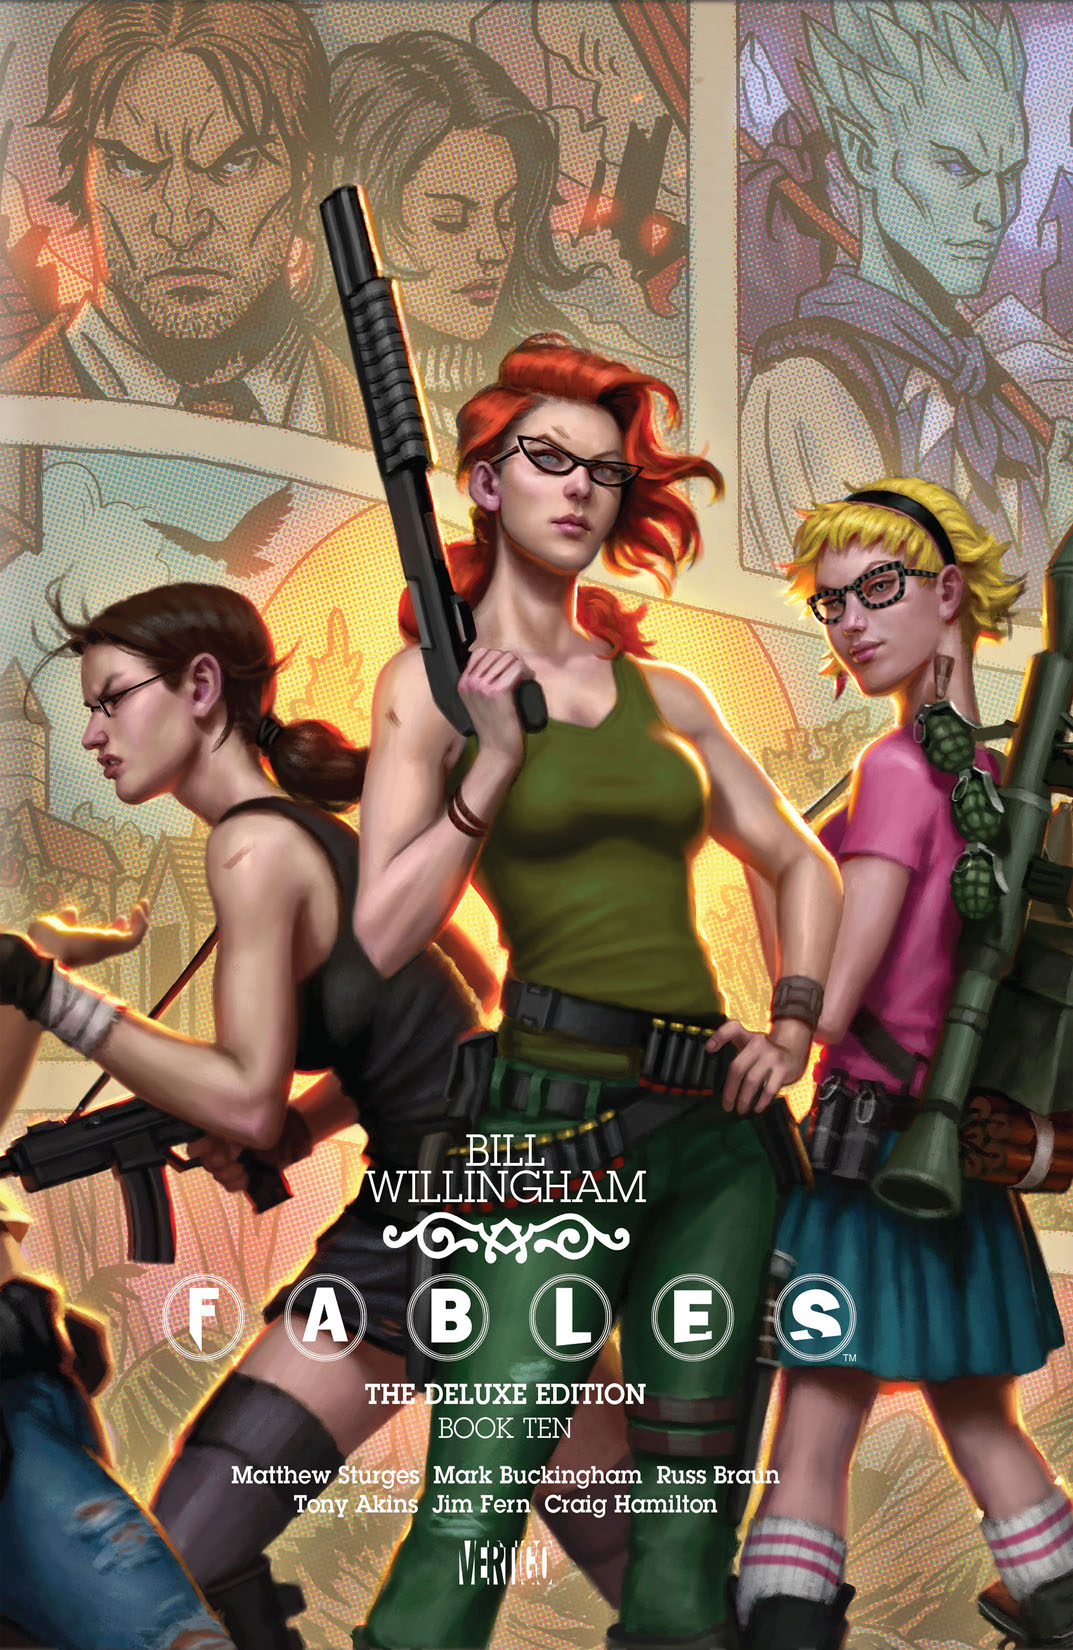 Fables: The Deluxe Edition Book Ten preview images